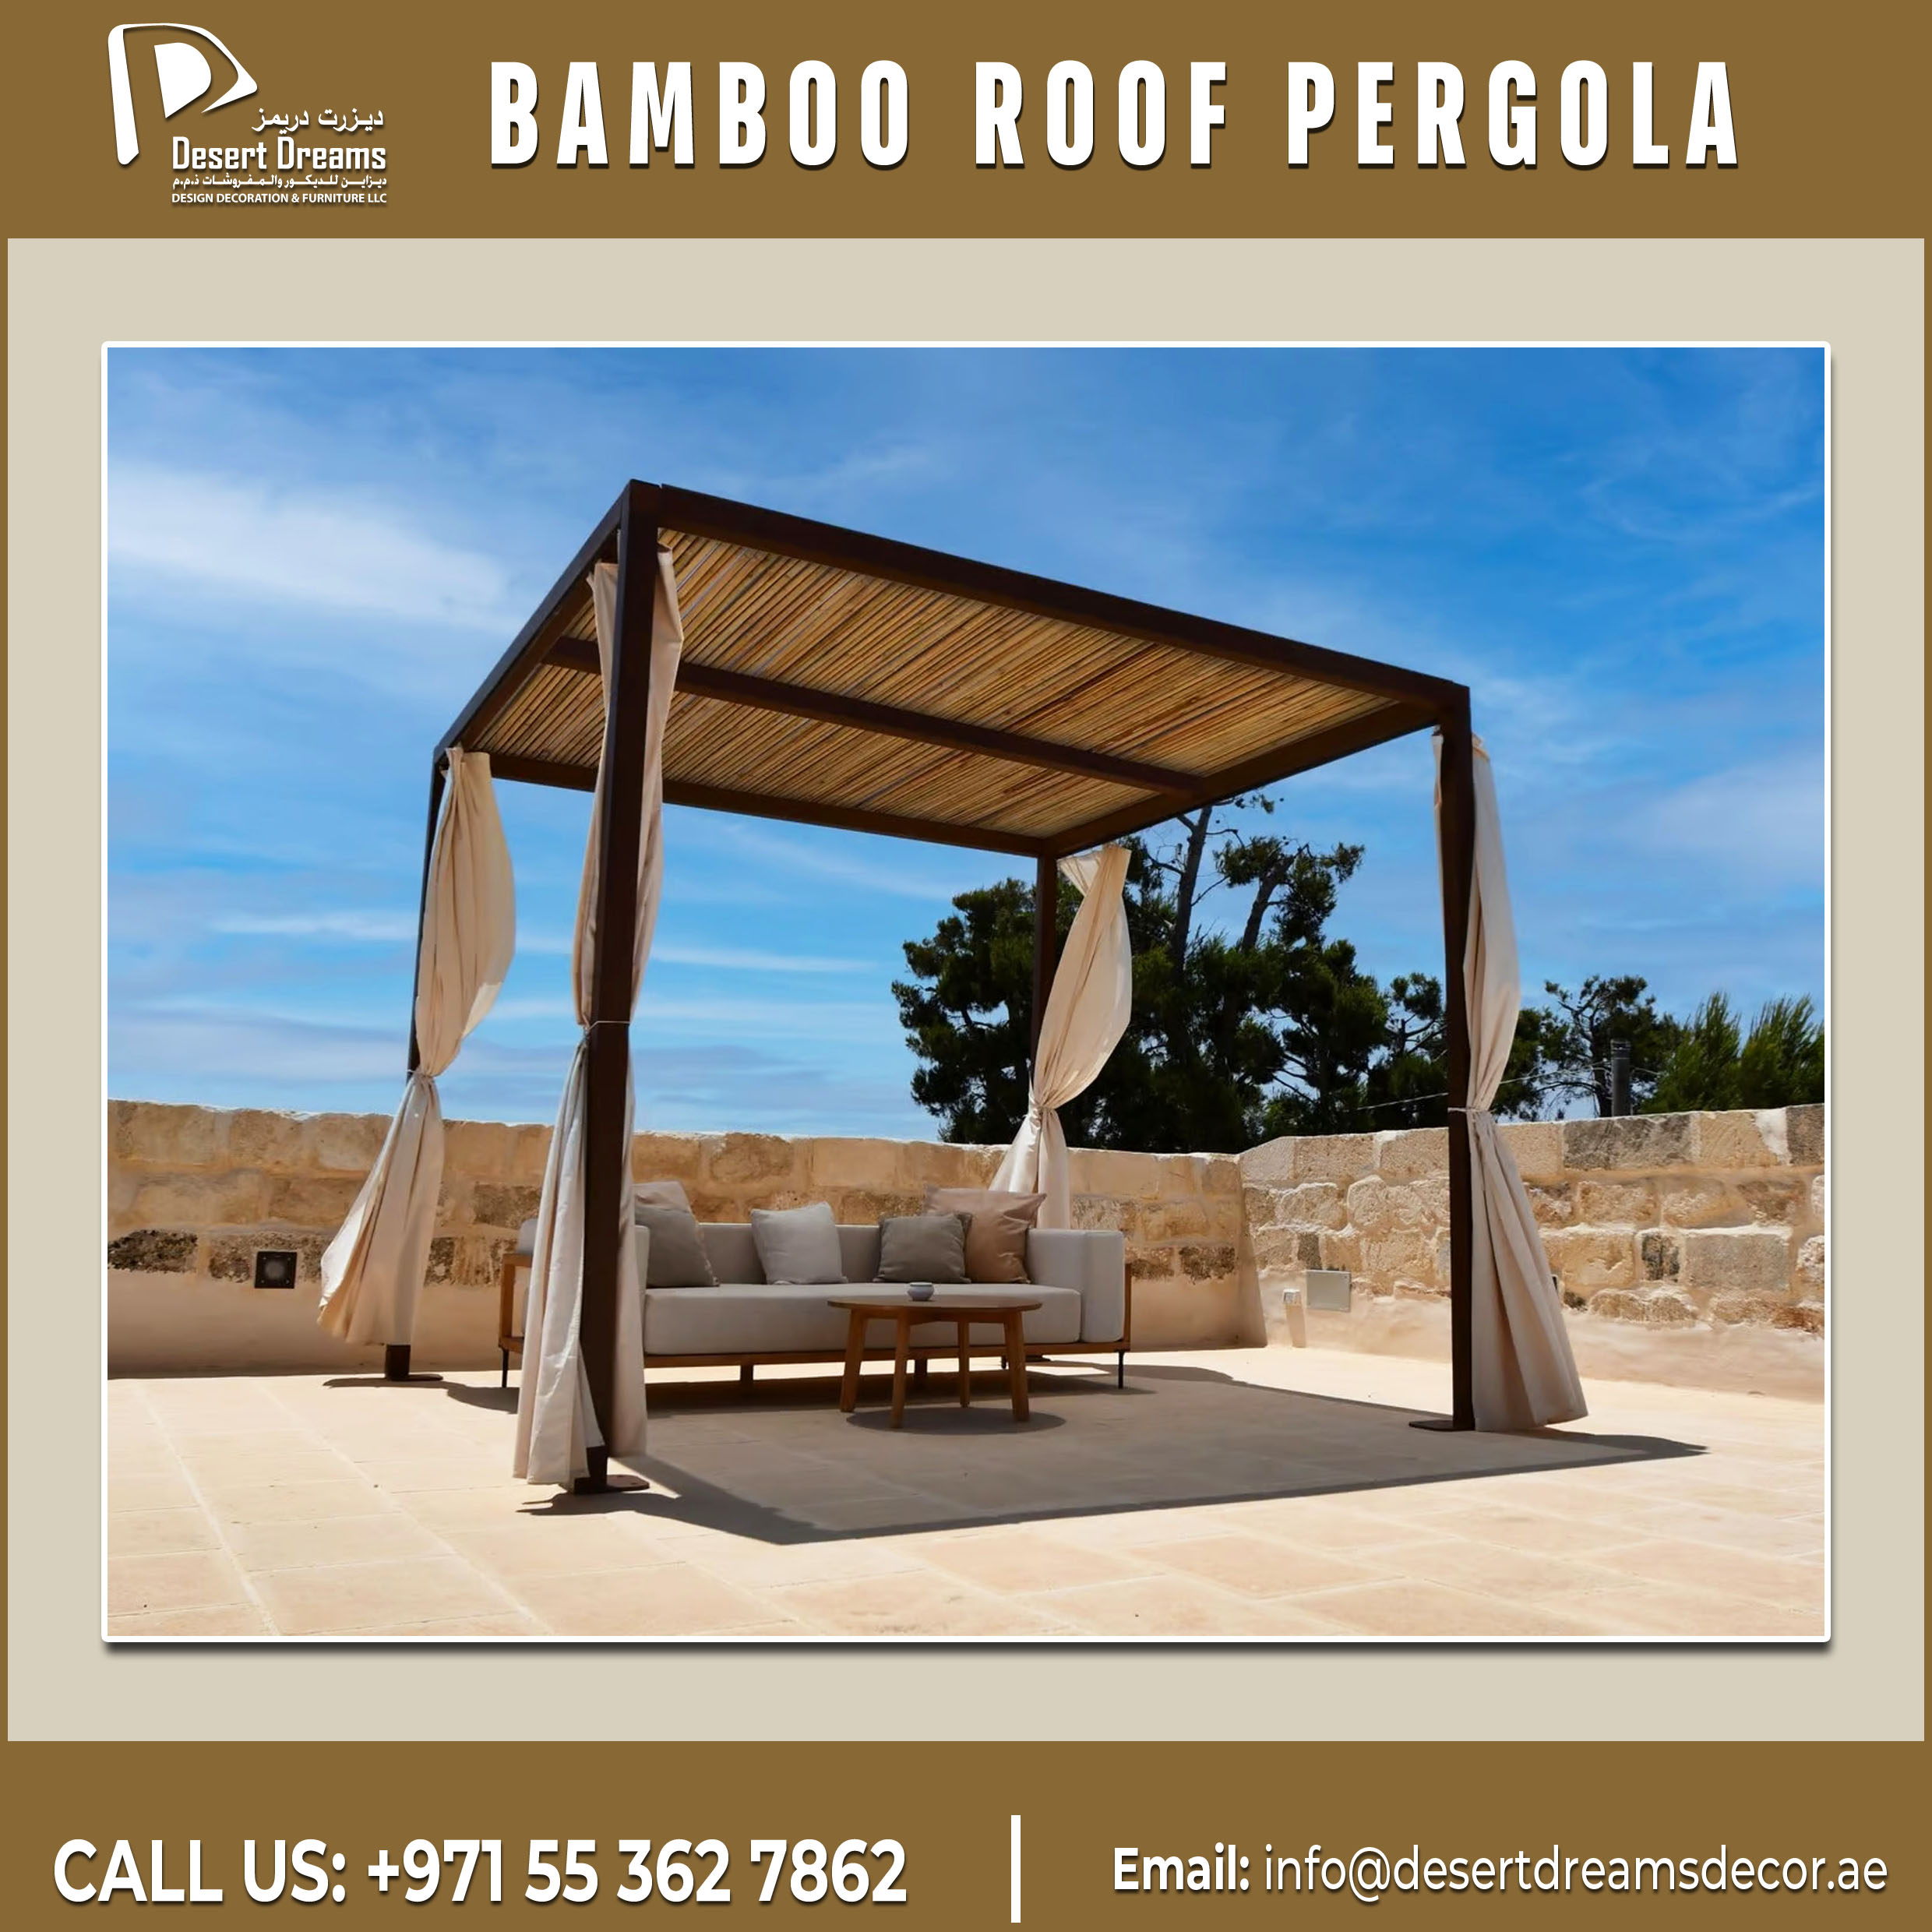 Supply and Install Bamboo Roofing Pergola in UAE (1).jpg